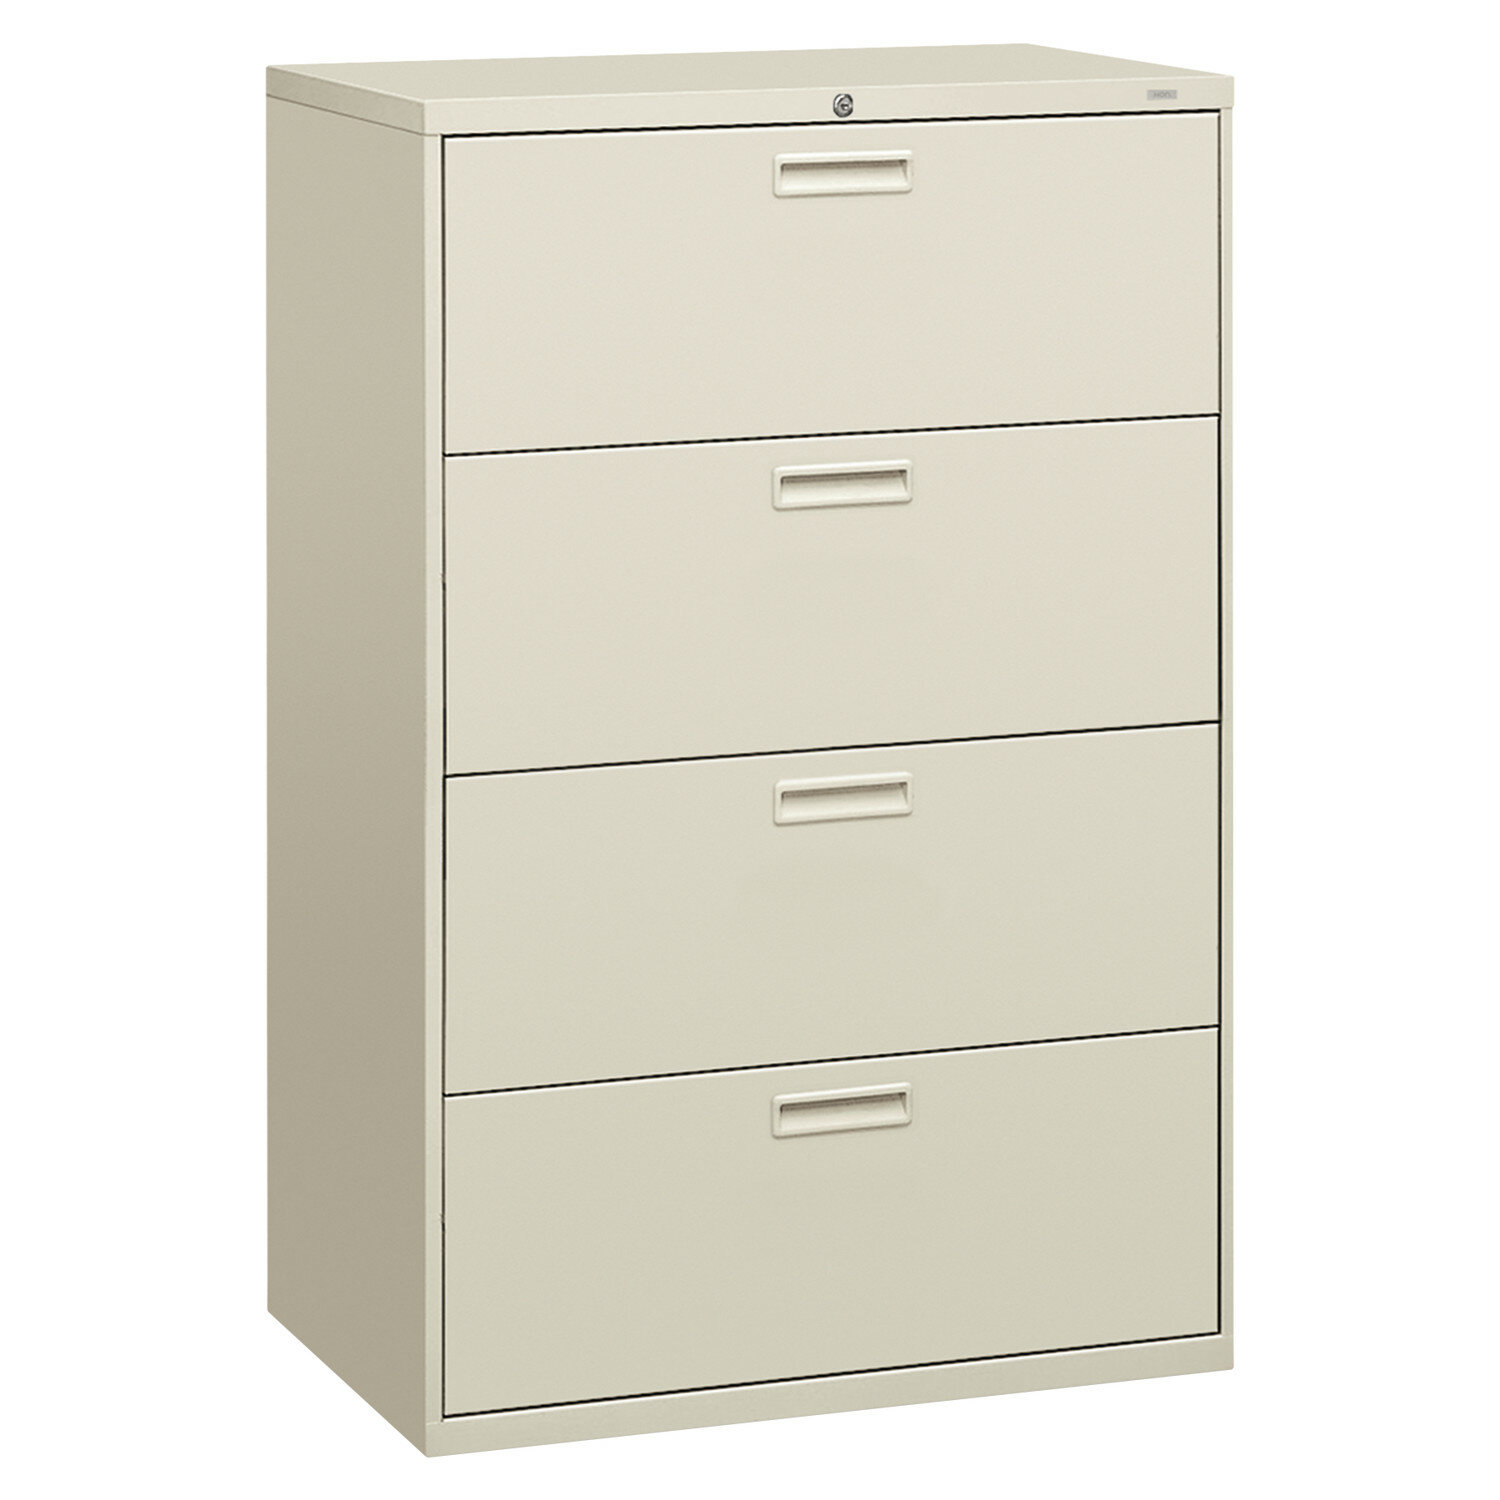 Hon 500 Series 4 Drawer Vertical Filing Cabinet Wayfairca intended for dimensions 1500 X 1500